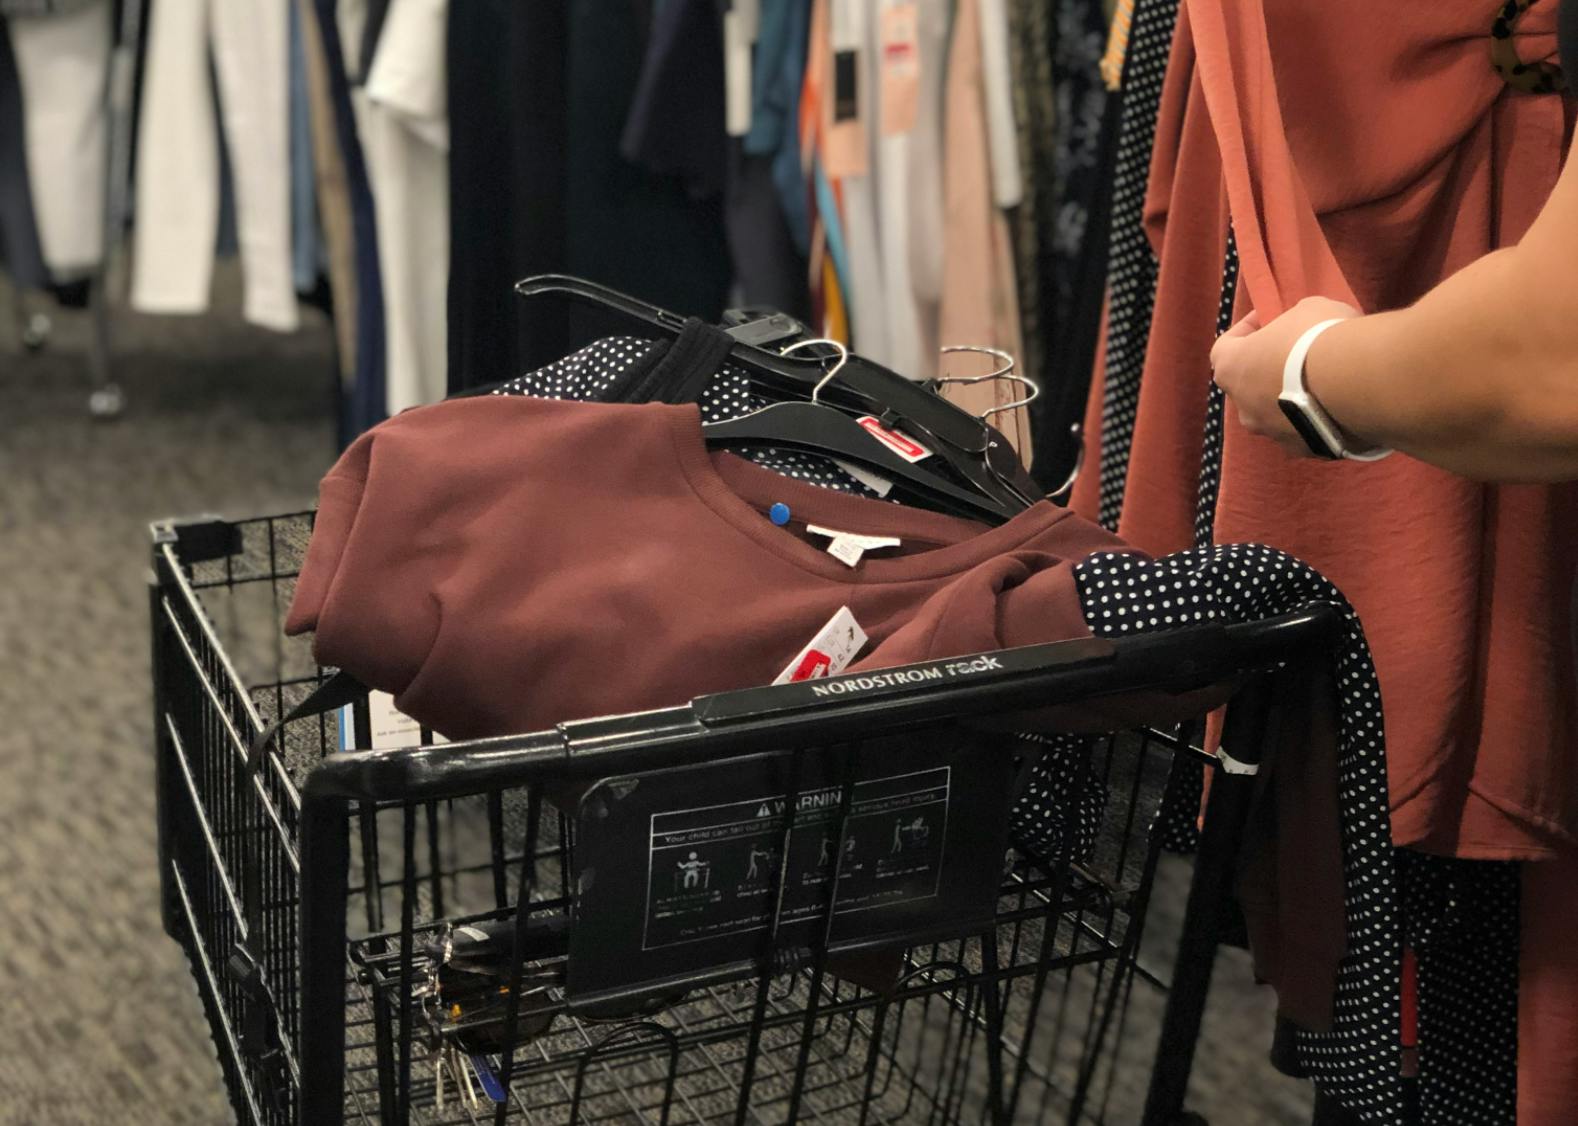 Take an extra 40% off clearance during Nordstrom Rack's sale